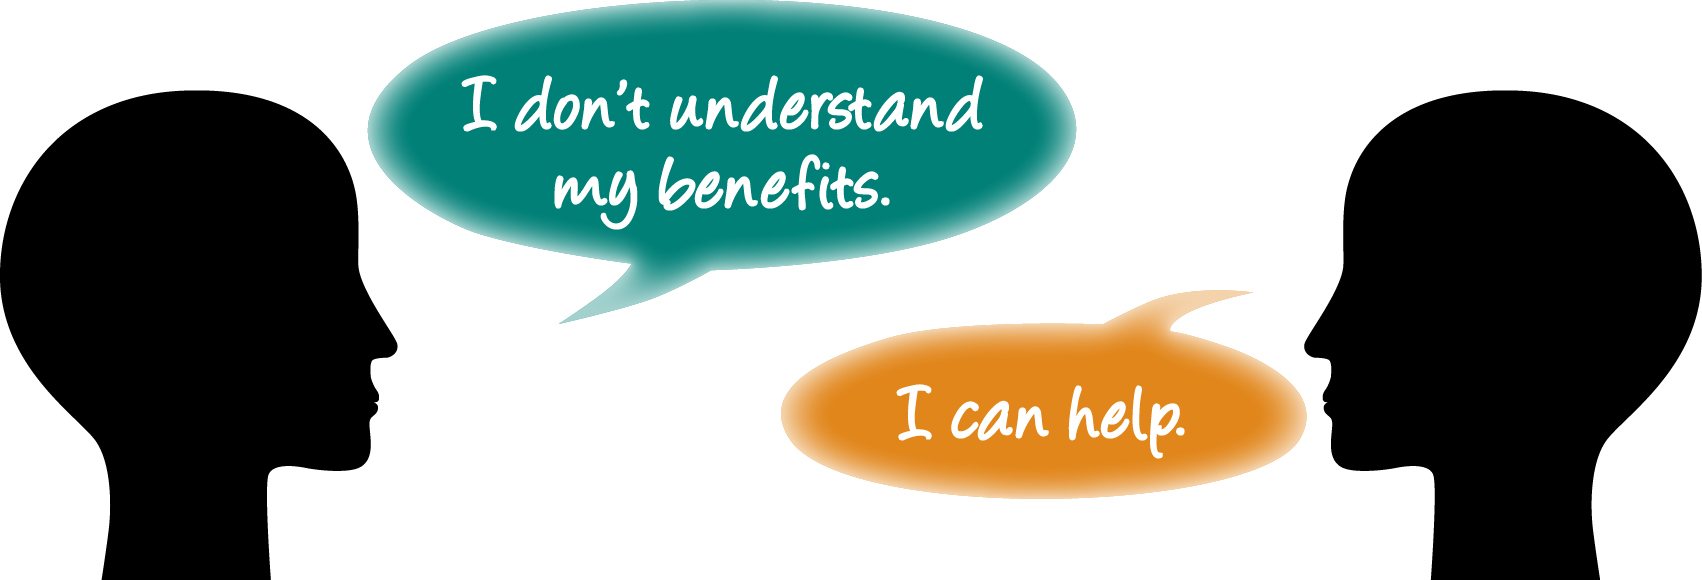 How Do You Help Employees Better Understand Their Benefits? Ask Them!